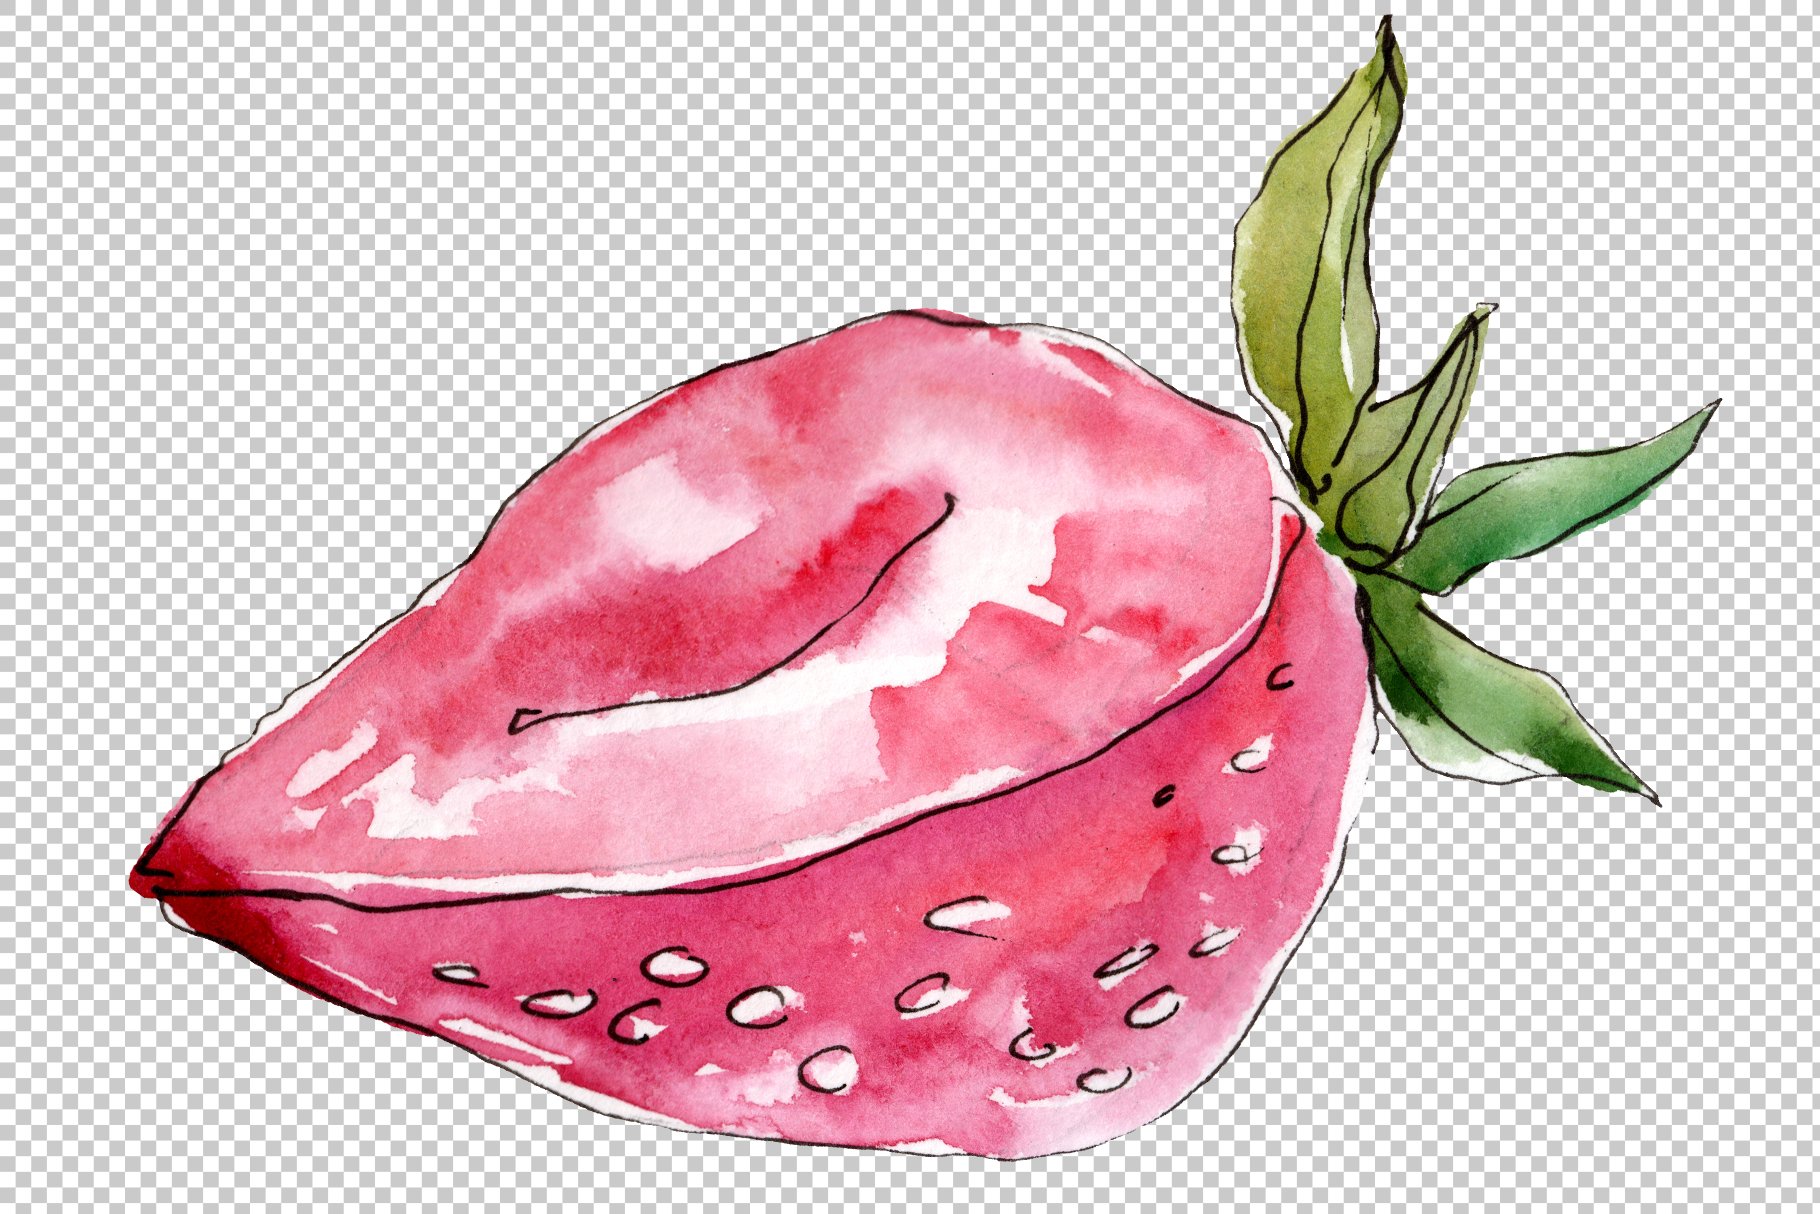 Half of strawberry on a transparent background.